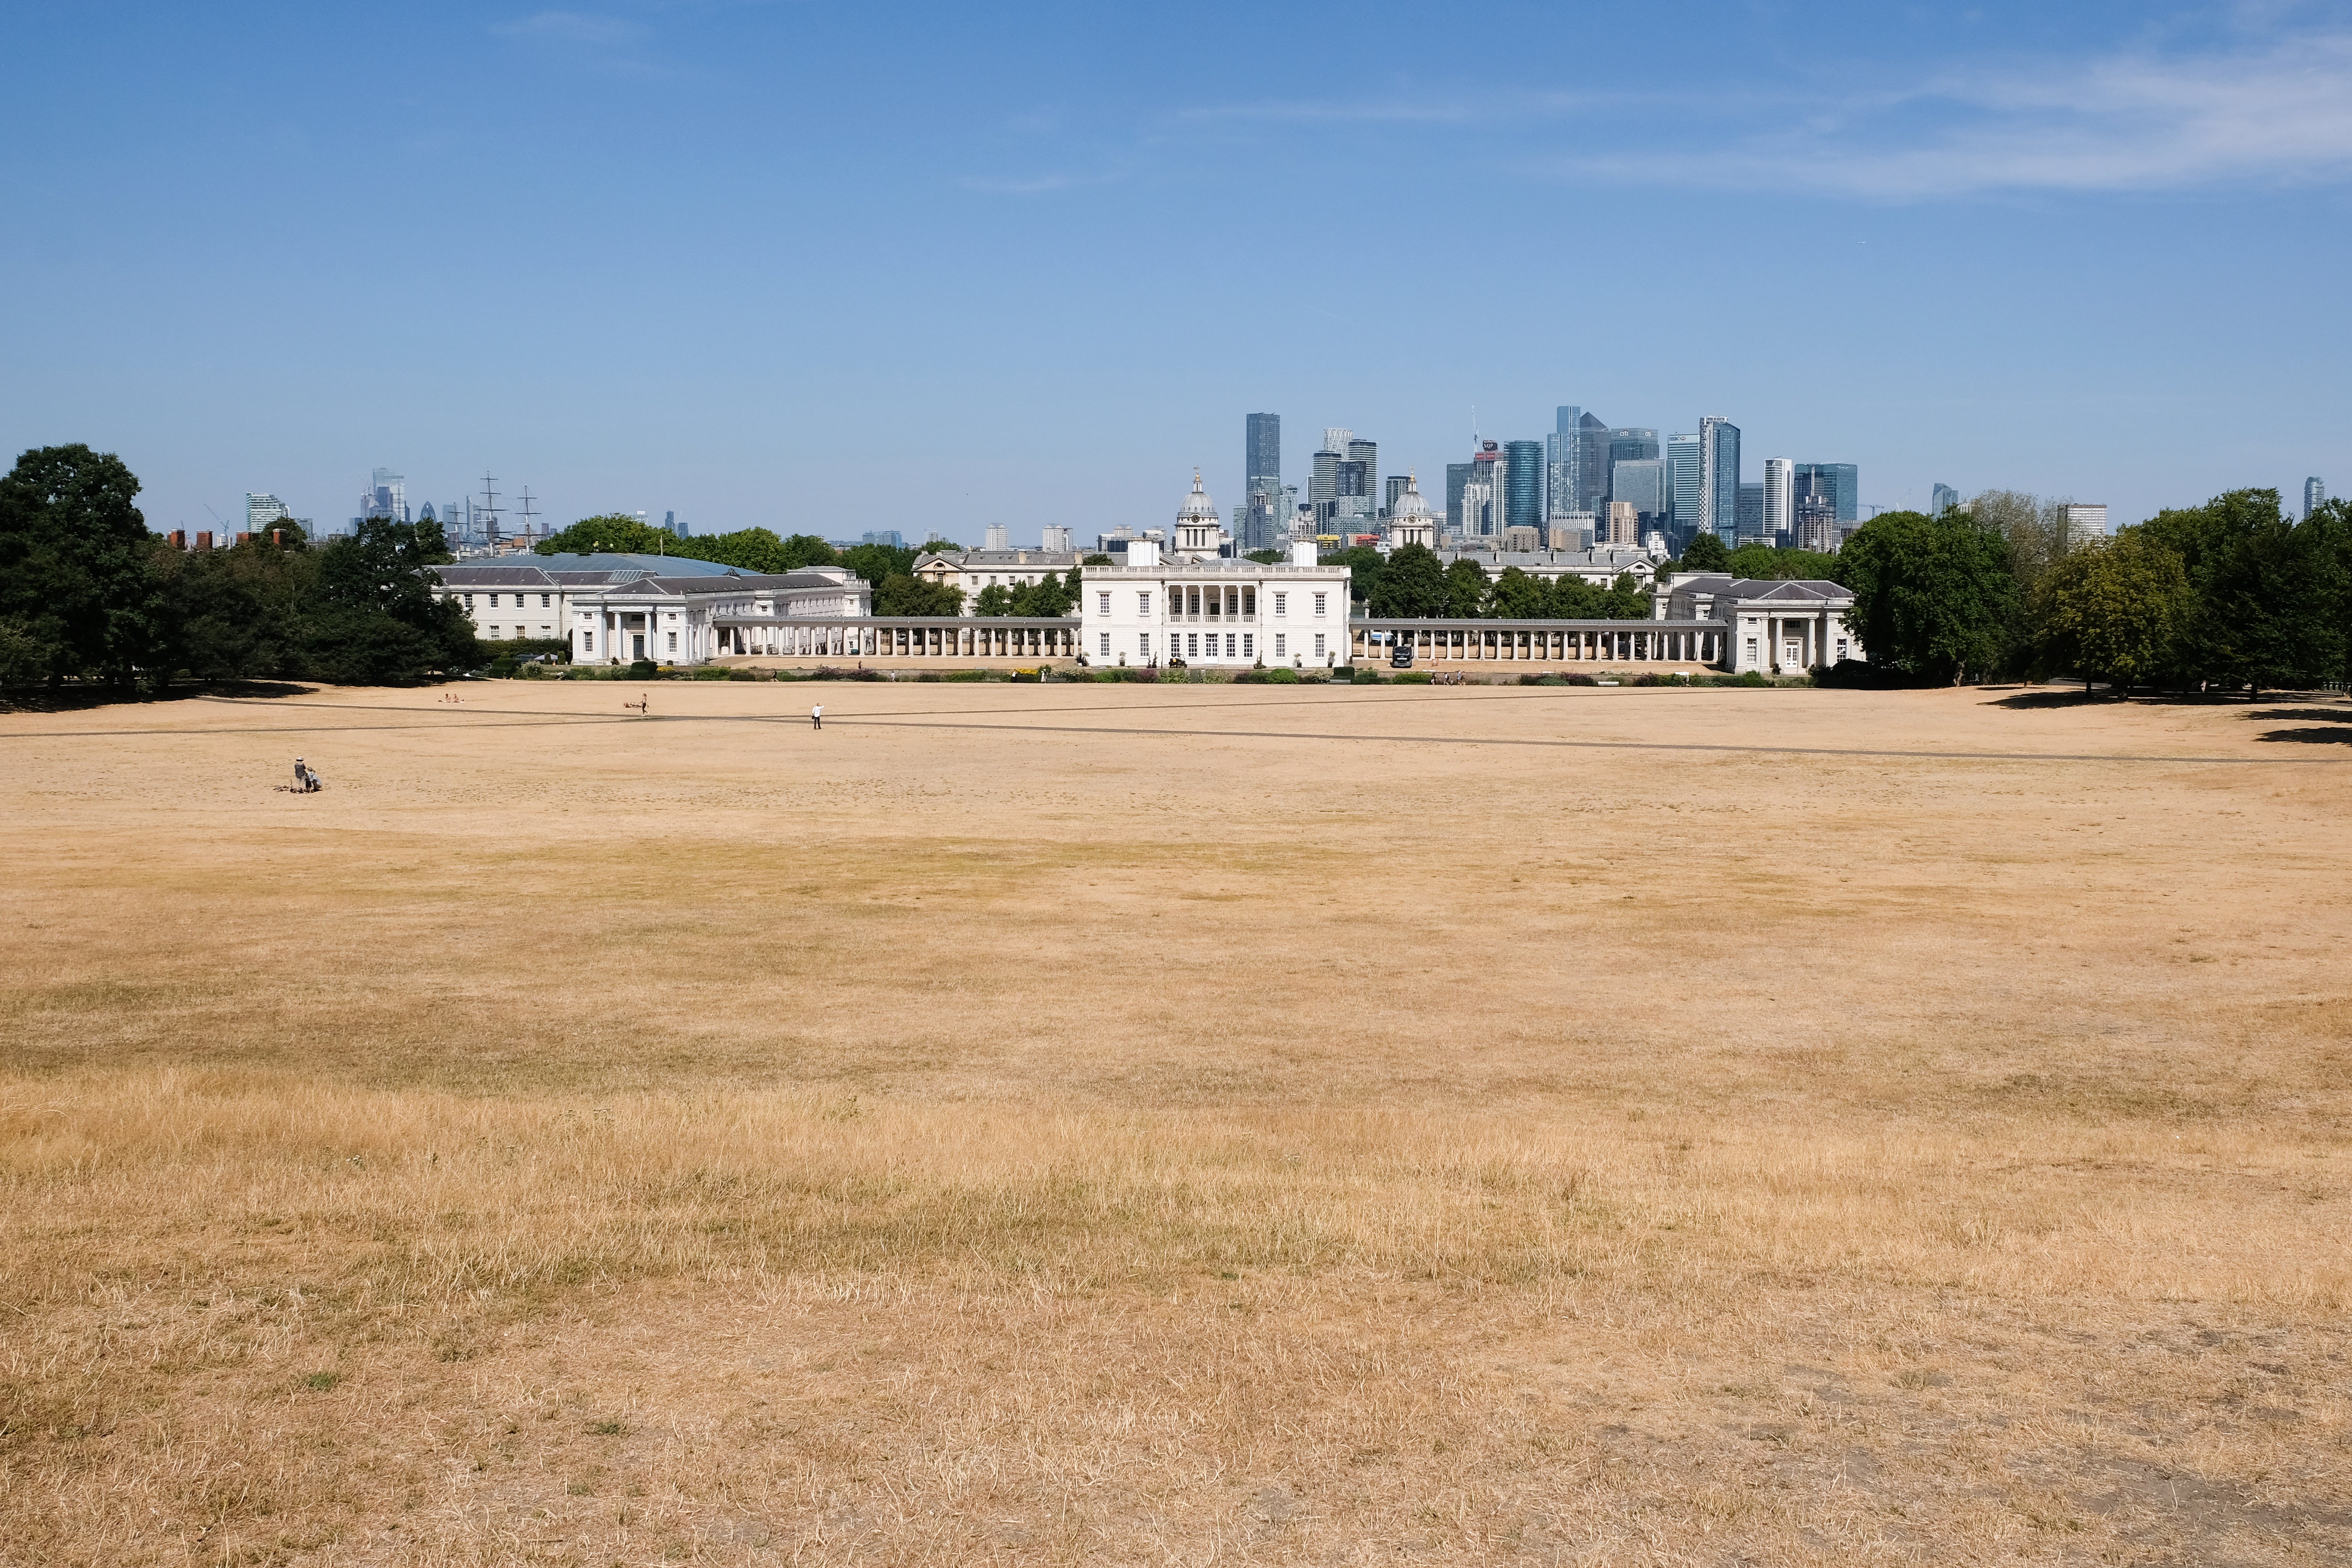 UK drought - parched grass in Greenwich Park, London on Tuesday.